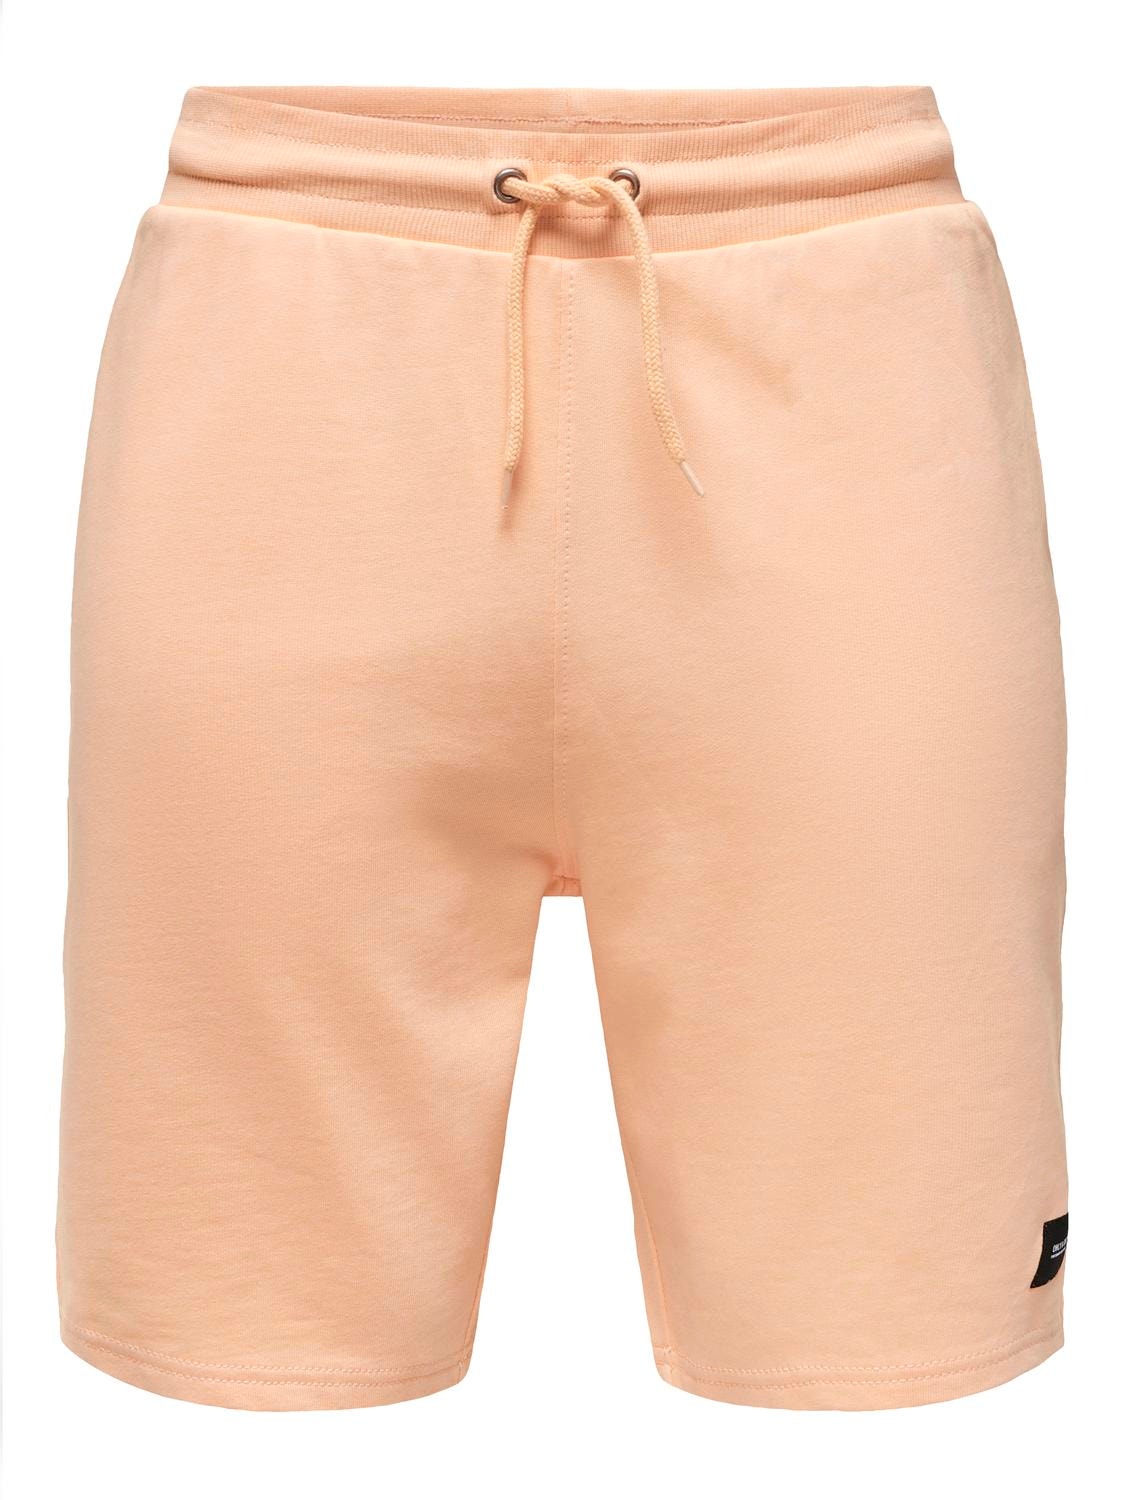 ONLY & SONS Regular Fit Mid waist Shorts -Peach Nectar - 22015623